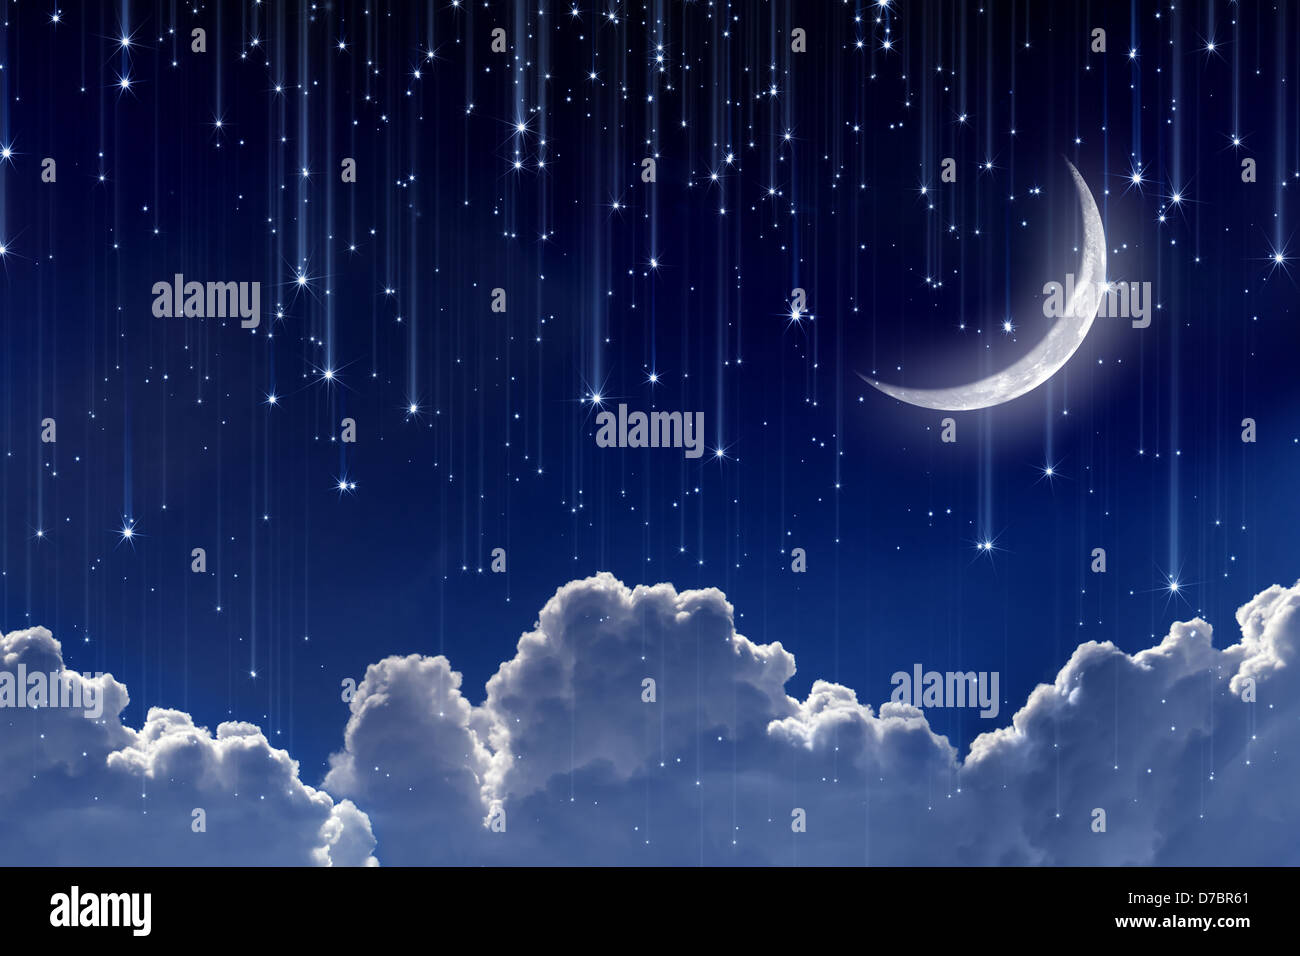 Peaceful background, night sky with moon, stars, beautiful clouds ...